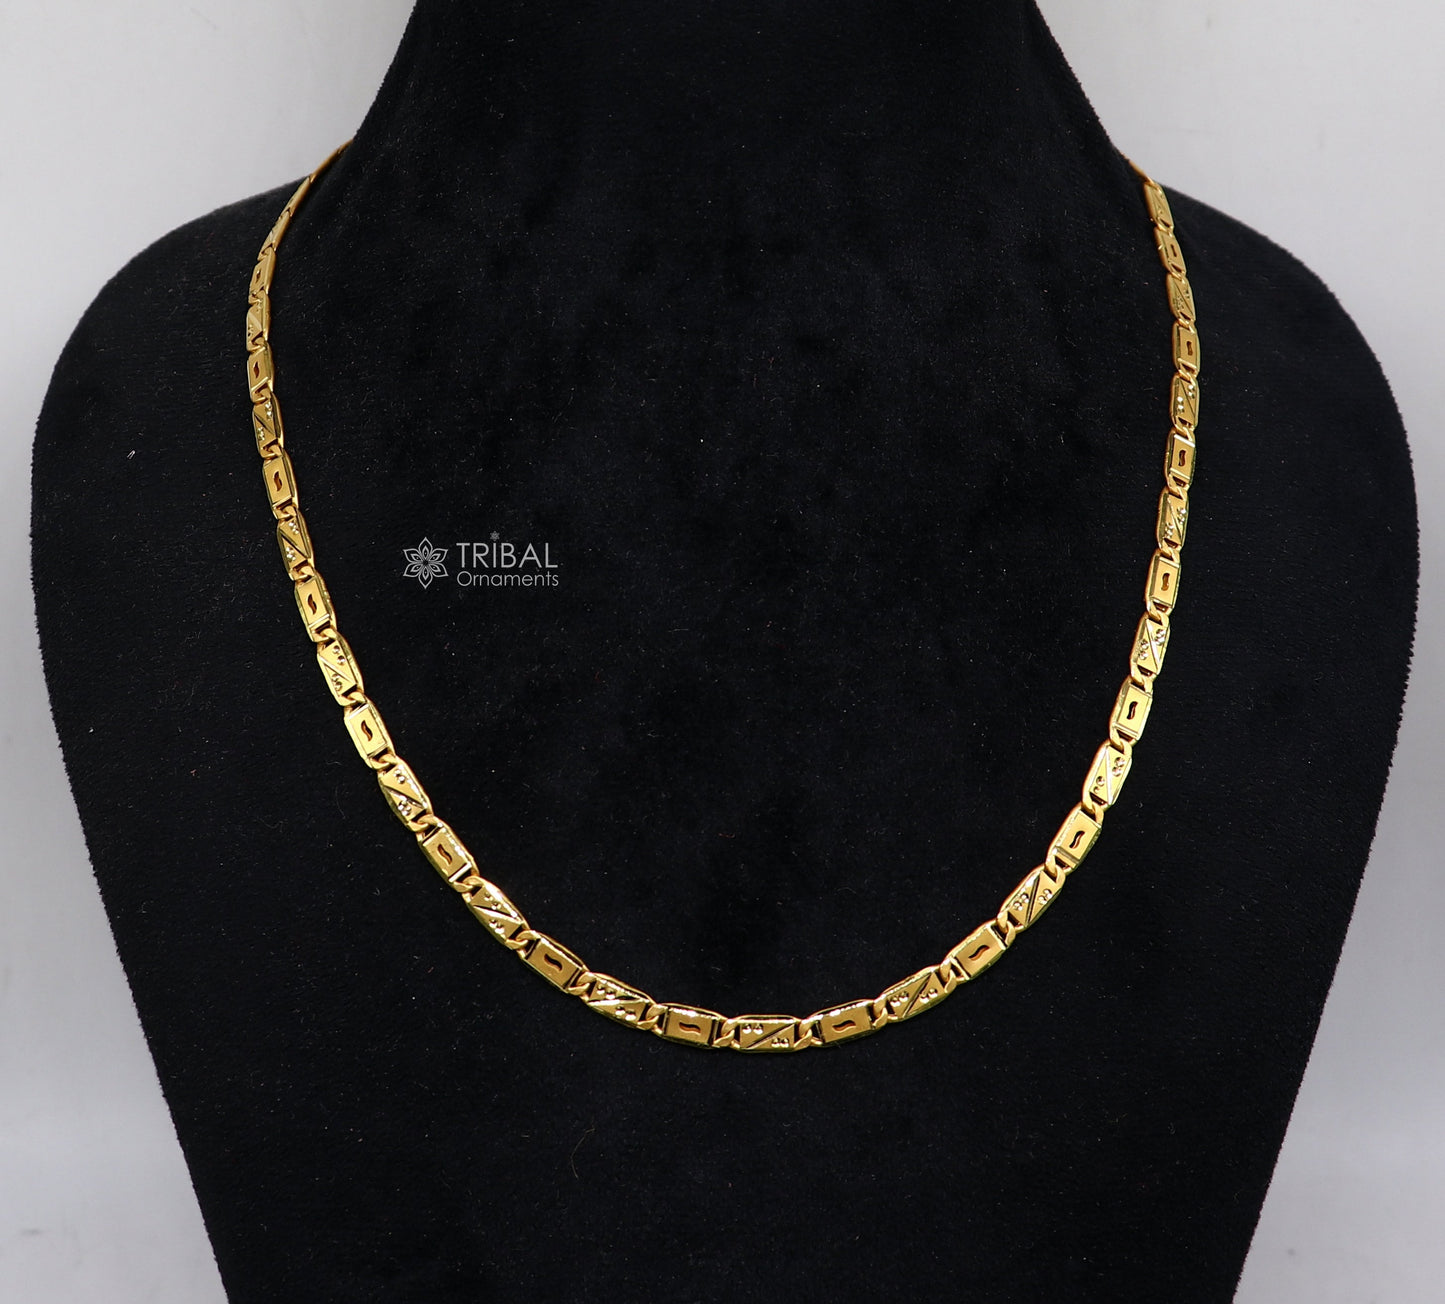 Exclusive modern trendy 22kt yellow gold handmade nawabi chain best men's gifting chain necklace jewelry gch584 - TRIBAL ORNAMENTS